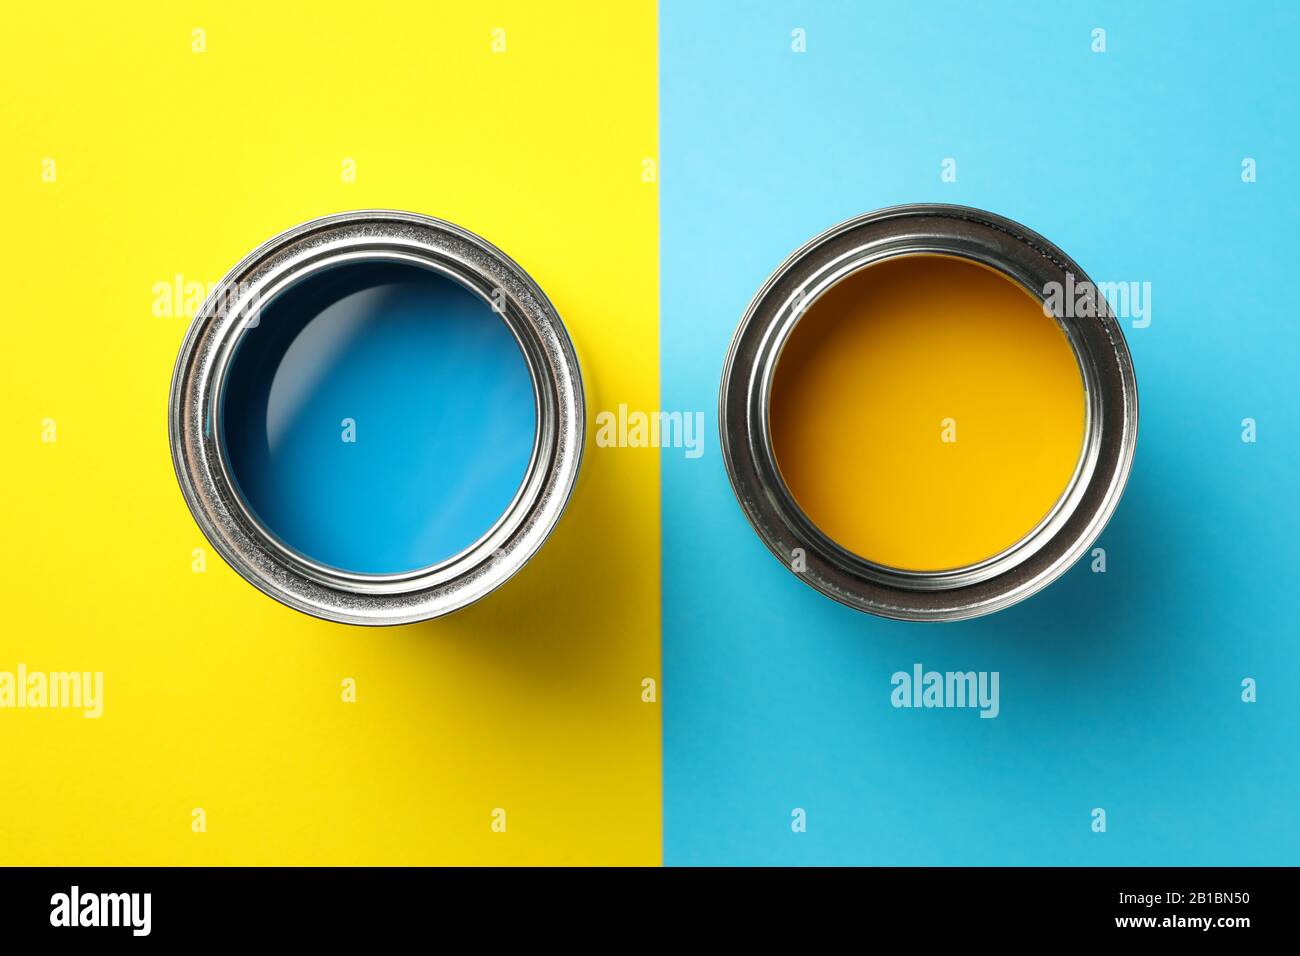 Cans of blue and yellow paint on two tone background, top view Stock Photo